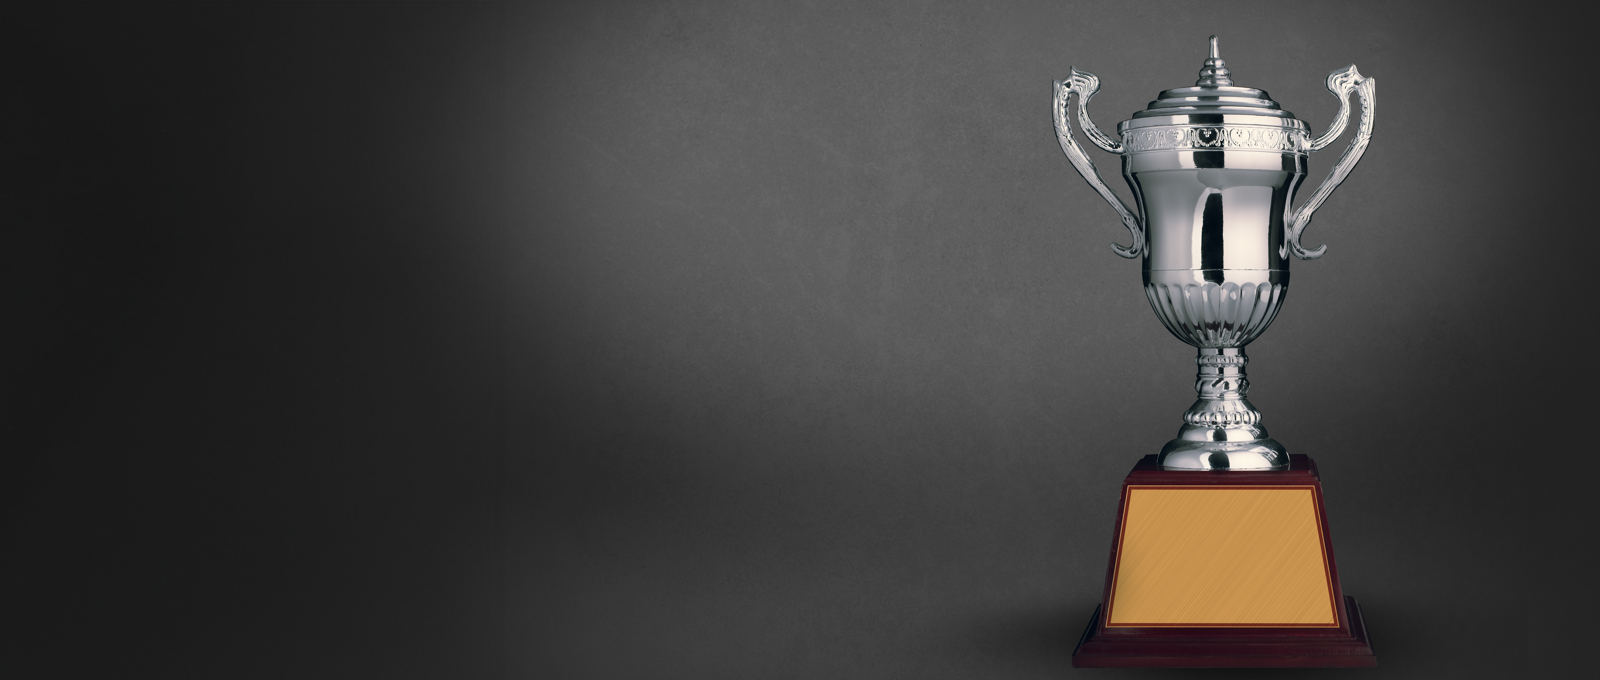 Photo of a silver trophy displayed against a grey shaded background